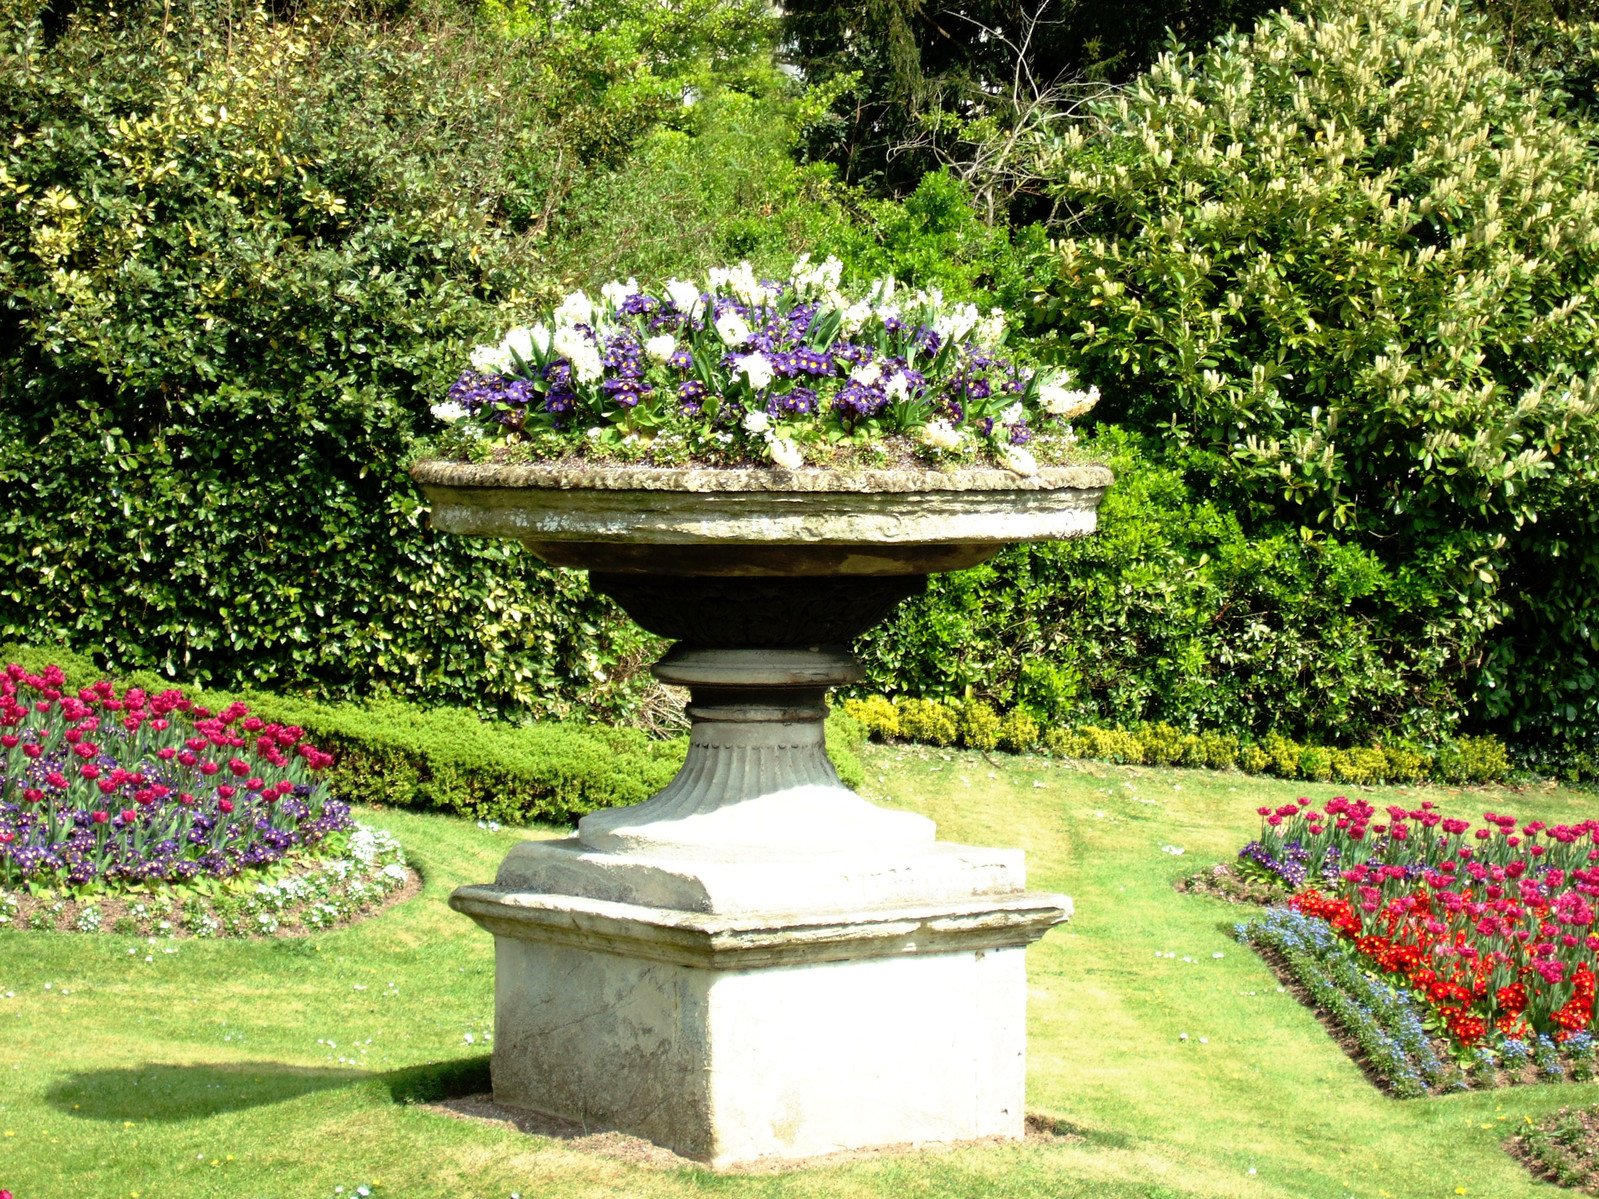 a circular planter sits in front of flowerbeds in a garden